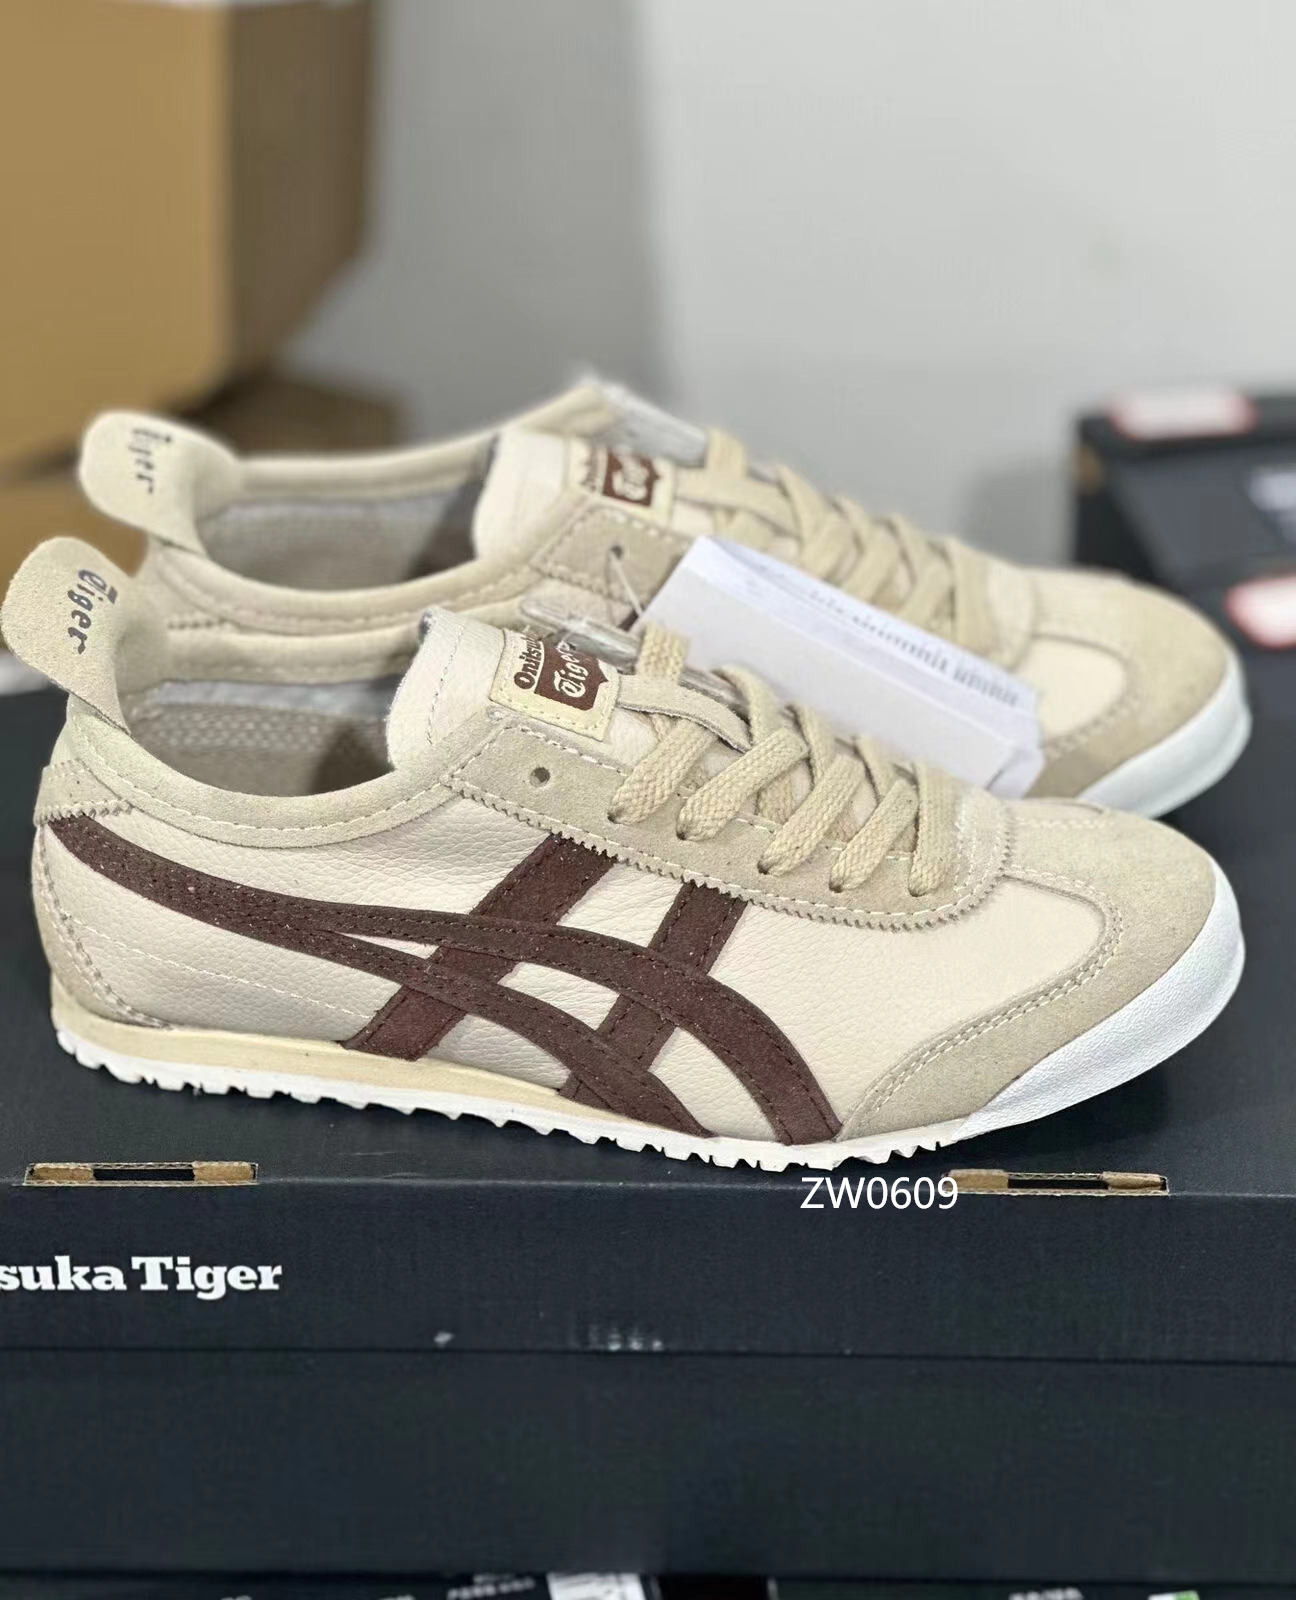 Onitsuka Tiger MEXICO 66 1183B391 251 Beige Brown Sneakers Shoes Unisex NEW